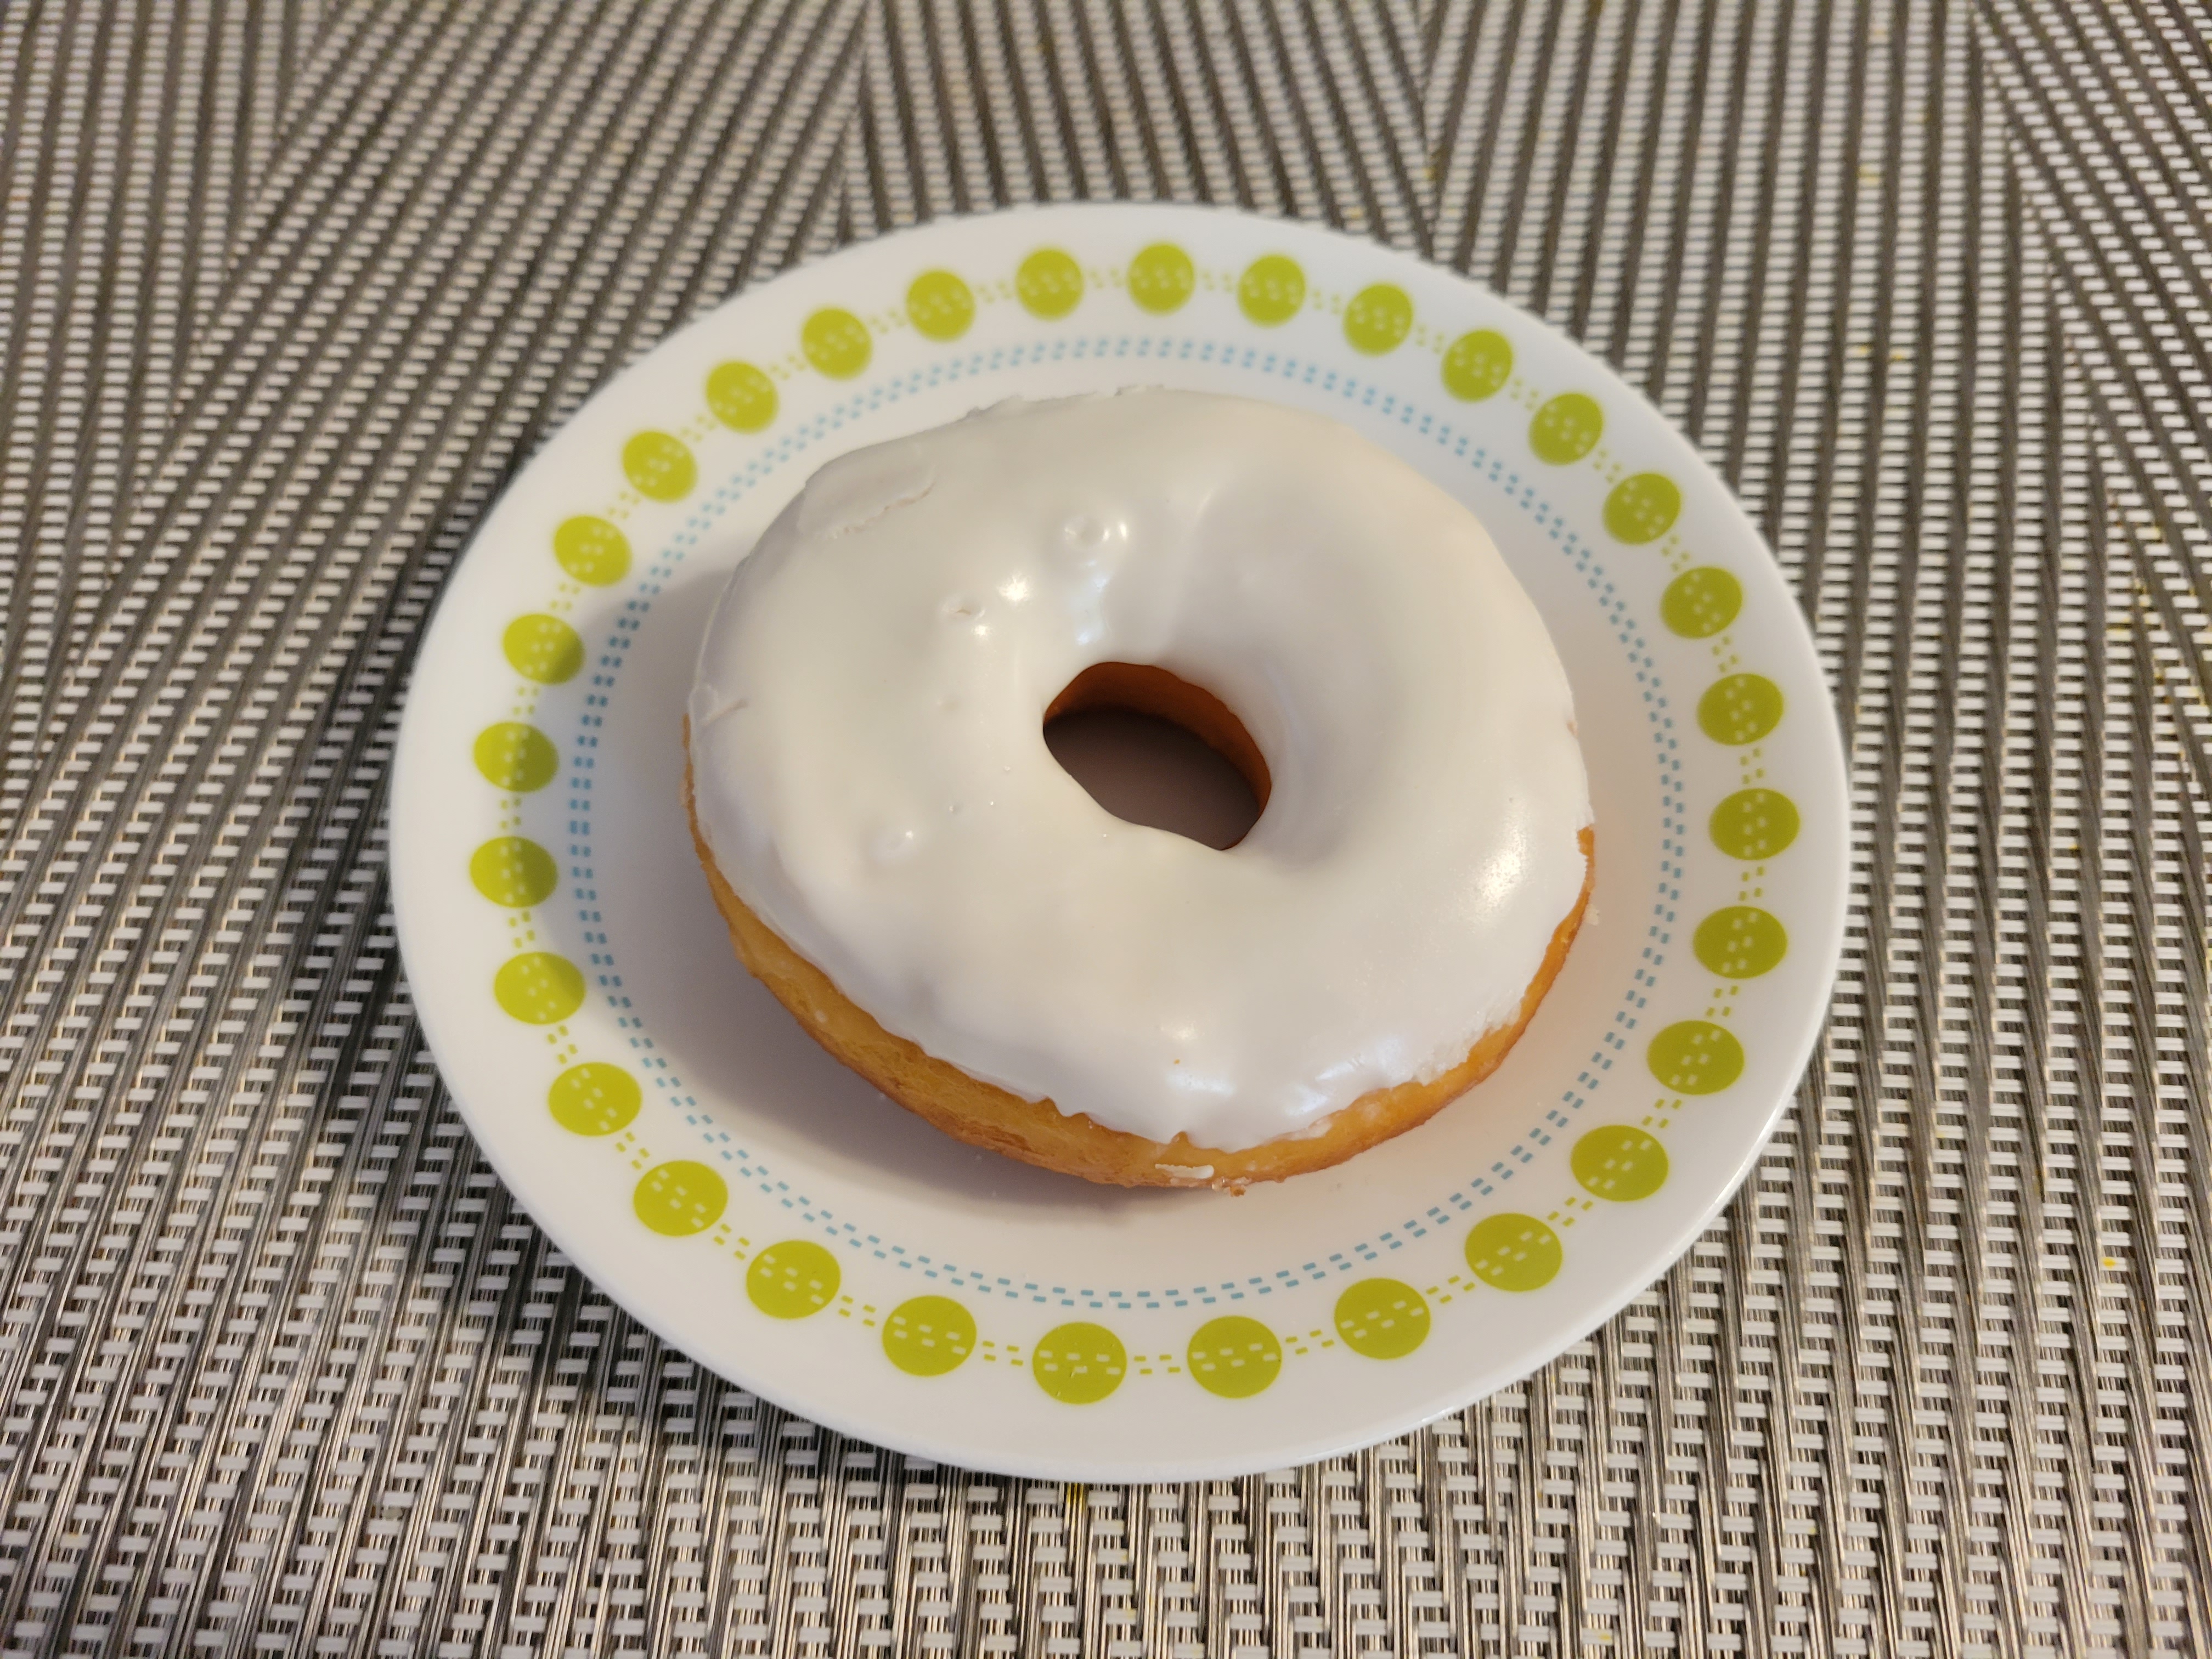 On a gute placemat, there is a white plate with a vanilla frosted yeast donut. Photo by Matthew Macomber.